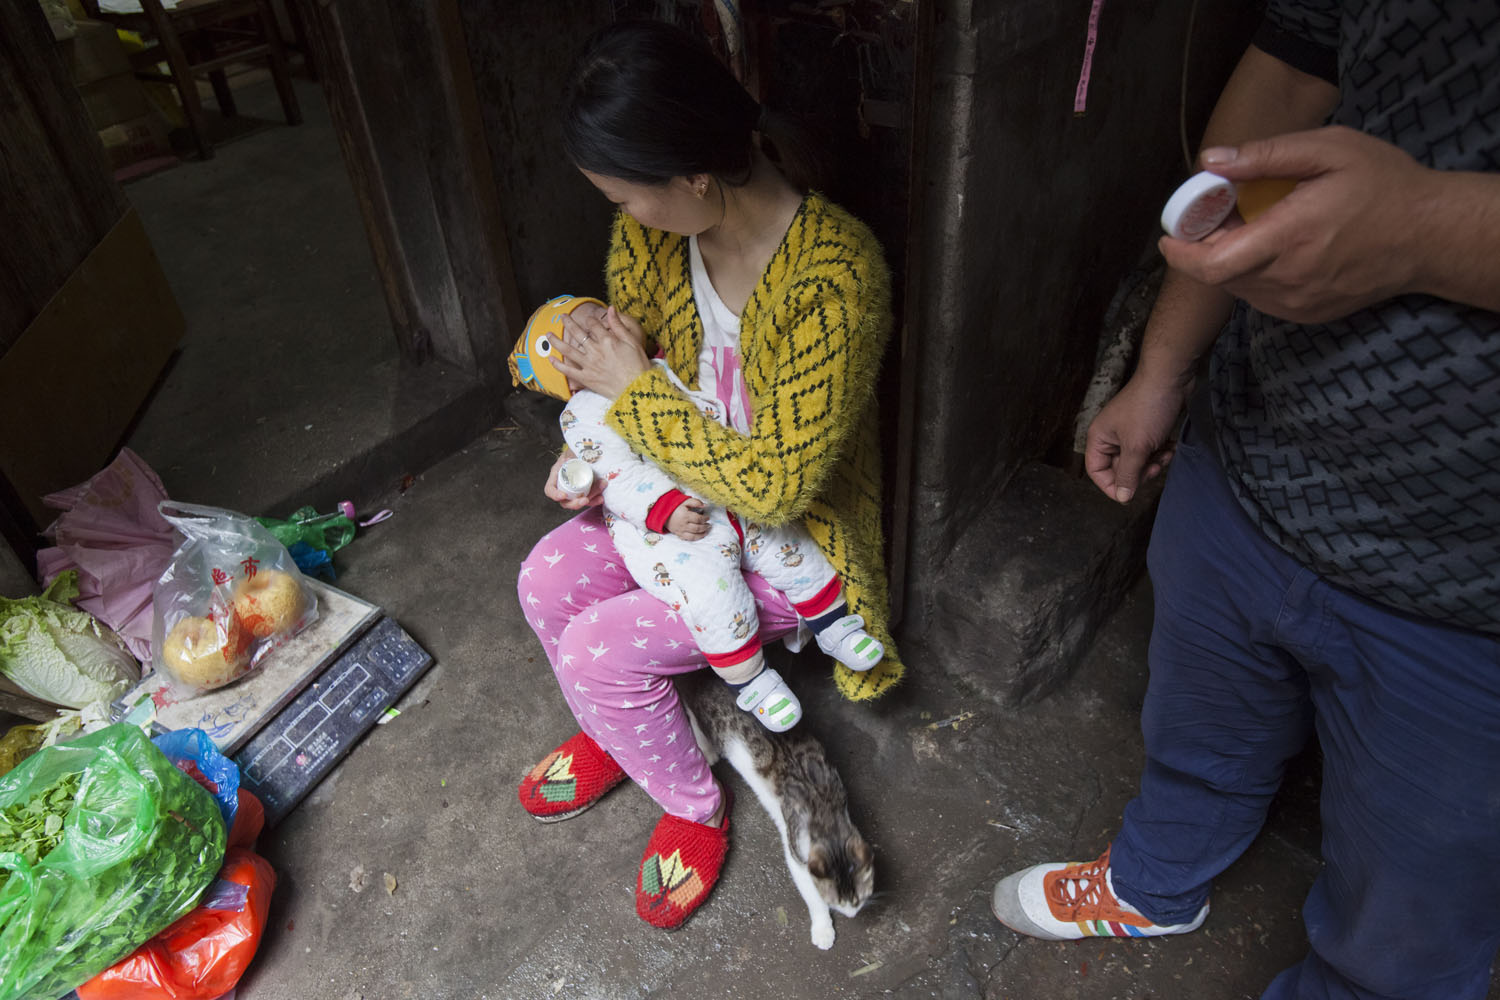   A mother applies cream to her child's face outside of their room. Guangfu Road. Shanghai, China. 2015.